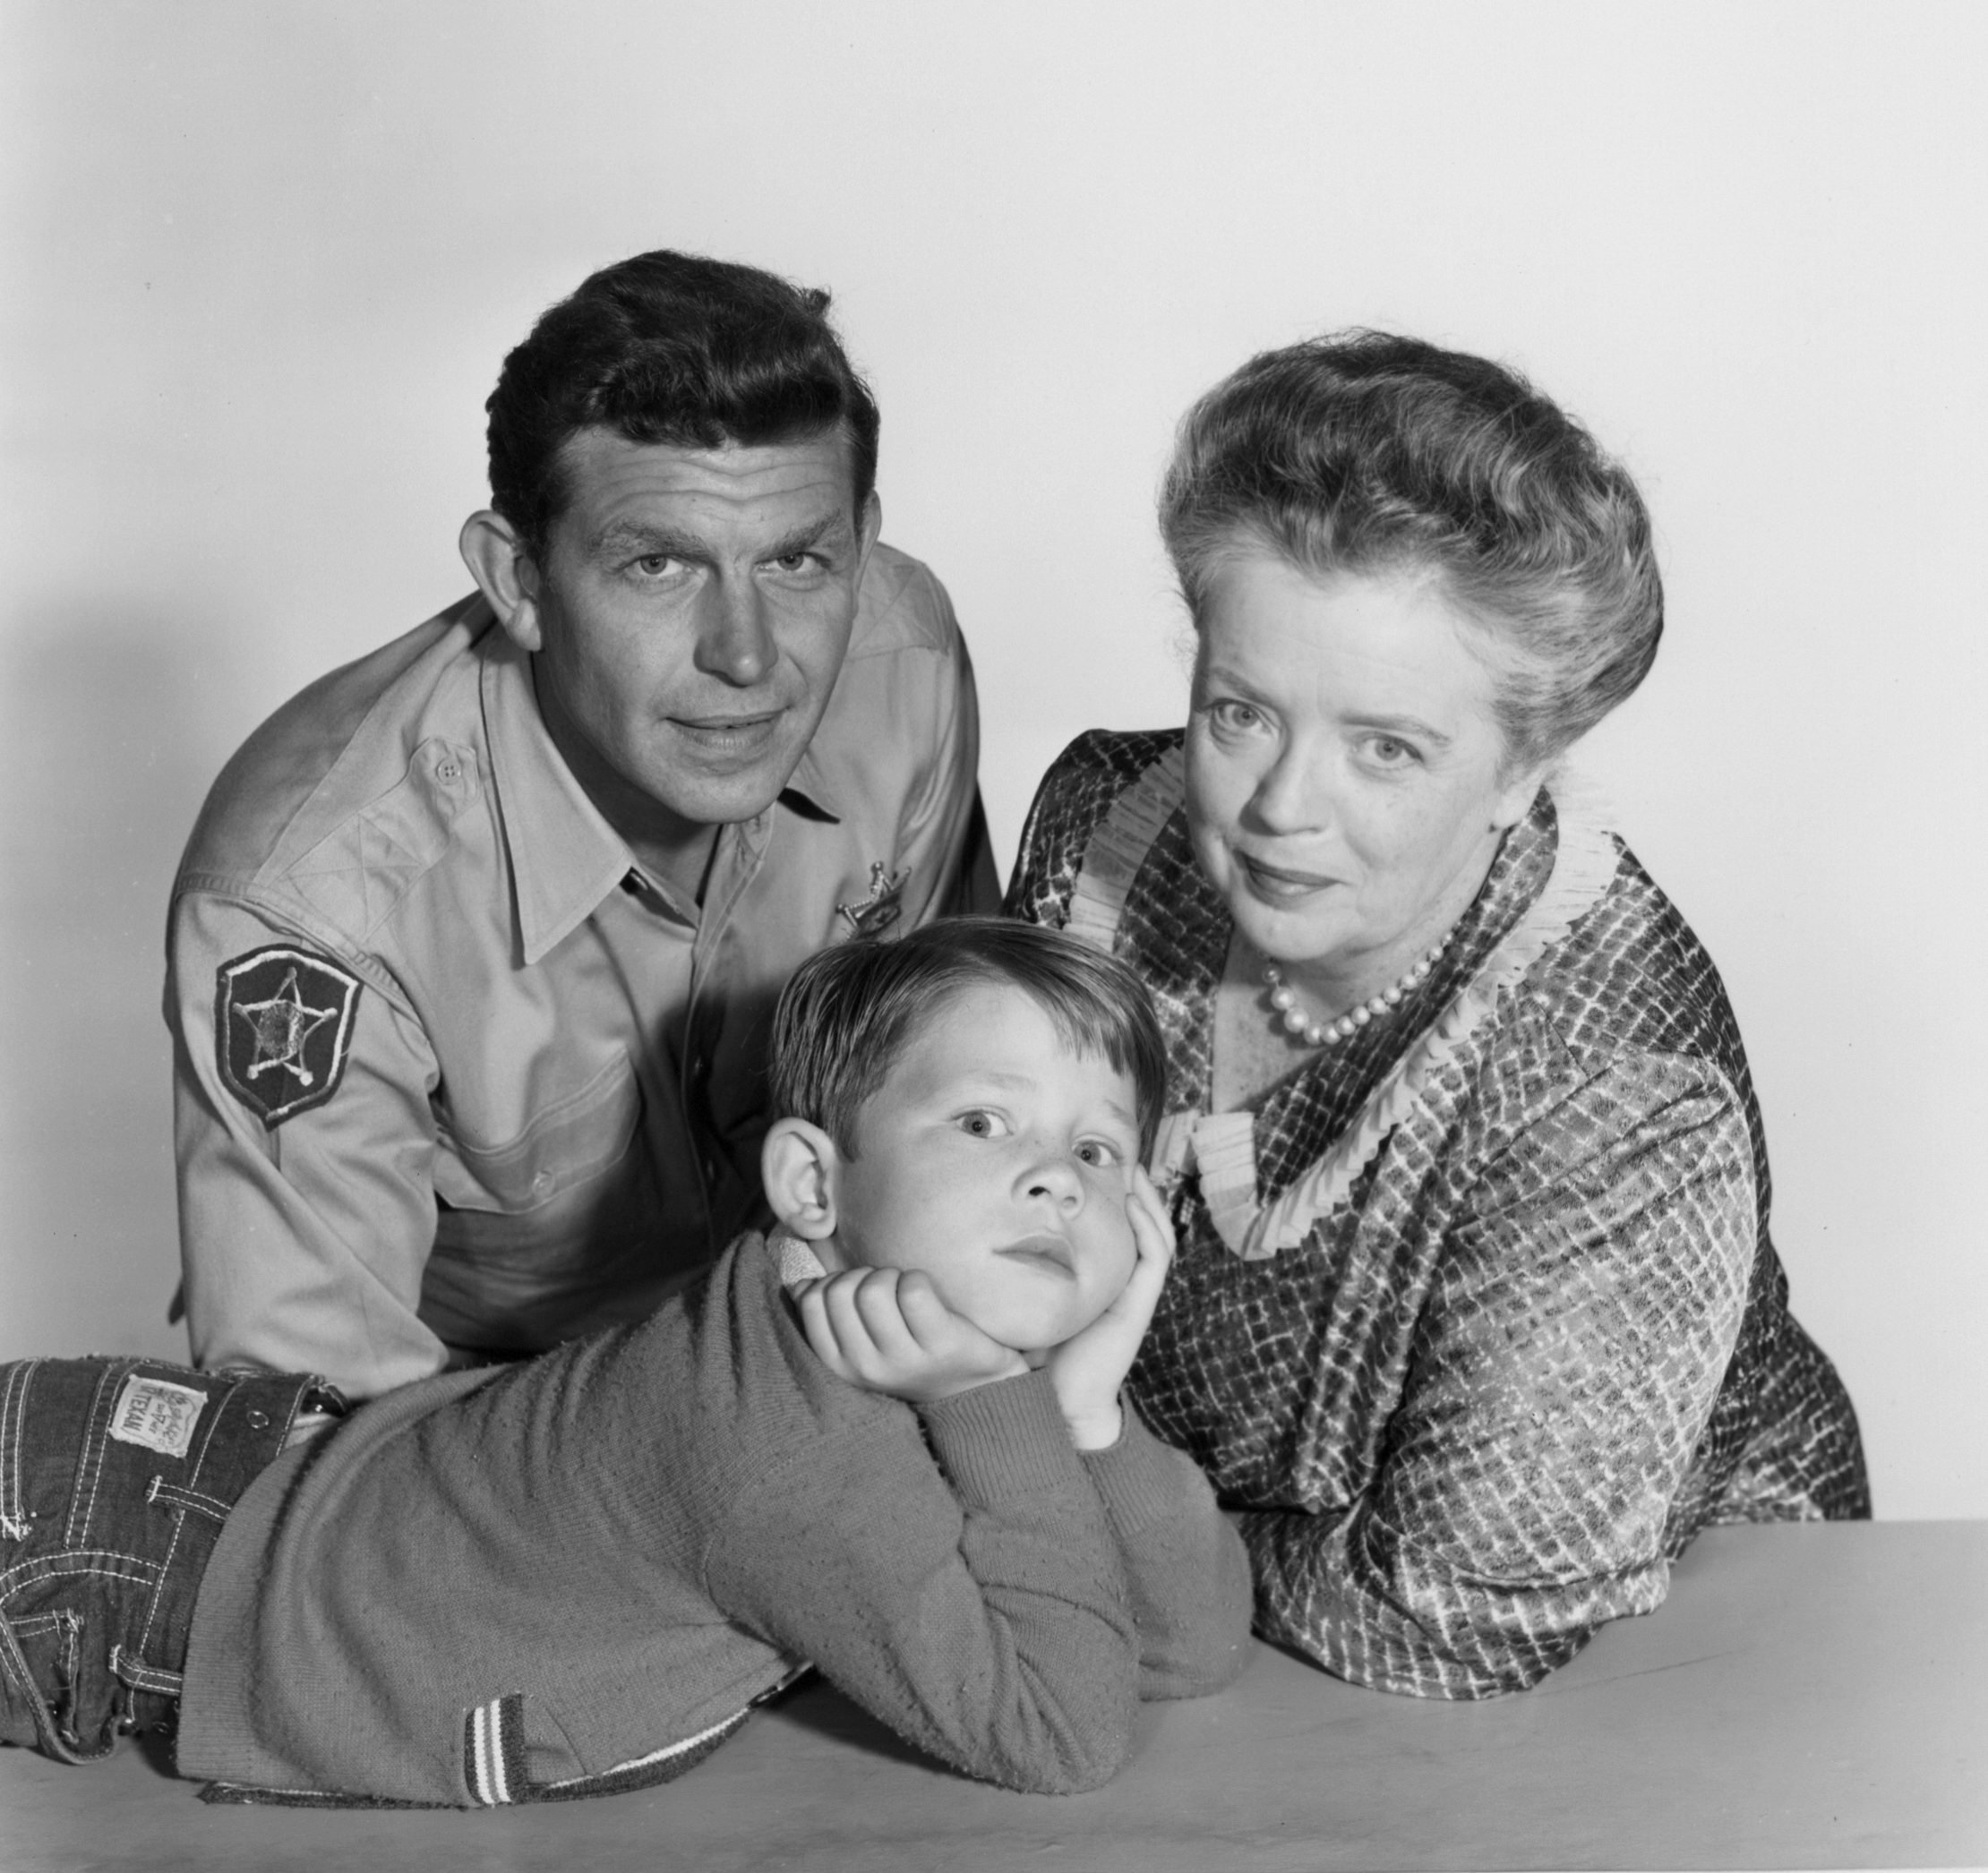 Left to right: 'The Andy Griffith Show' actors Andy Griffith, Ronny Howard, and Frances Bavier